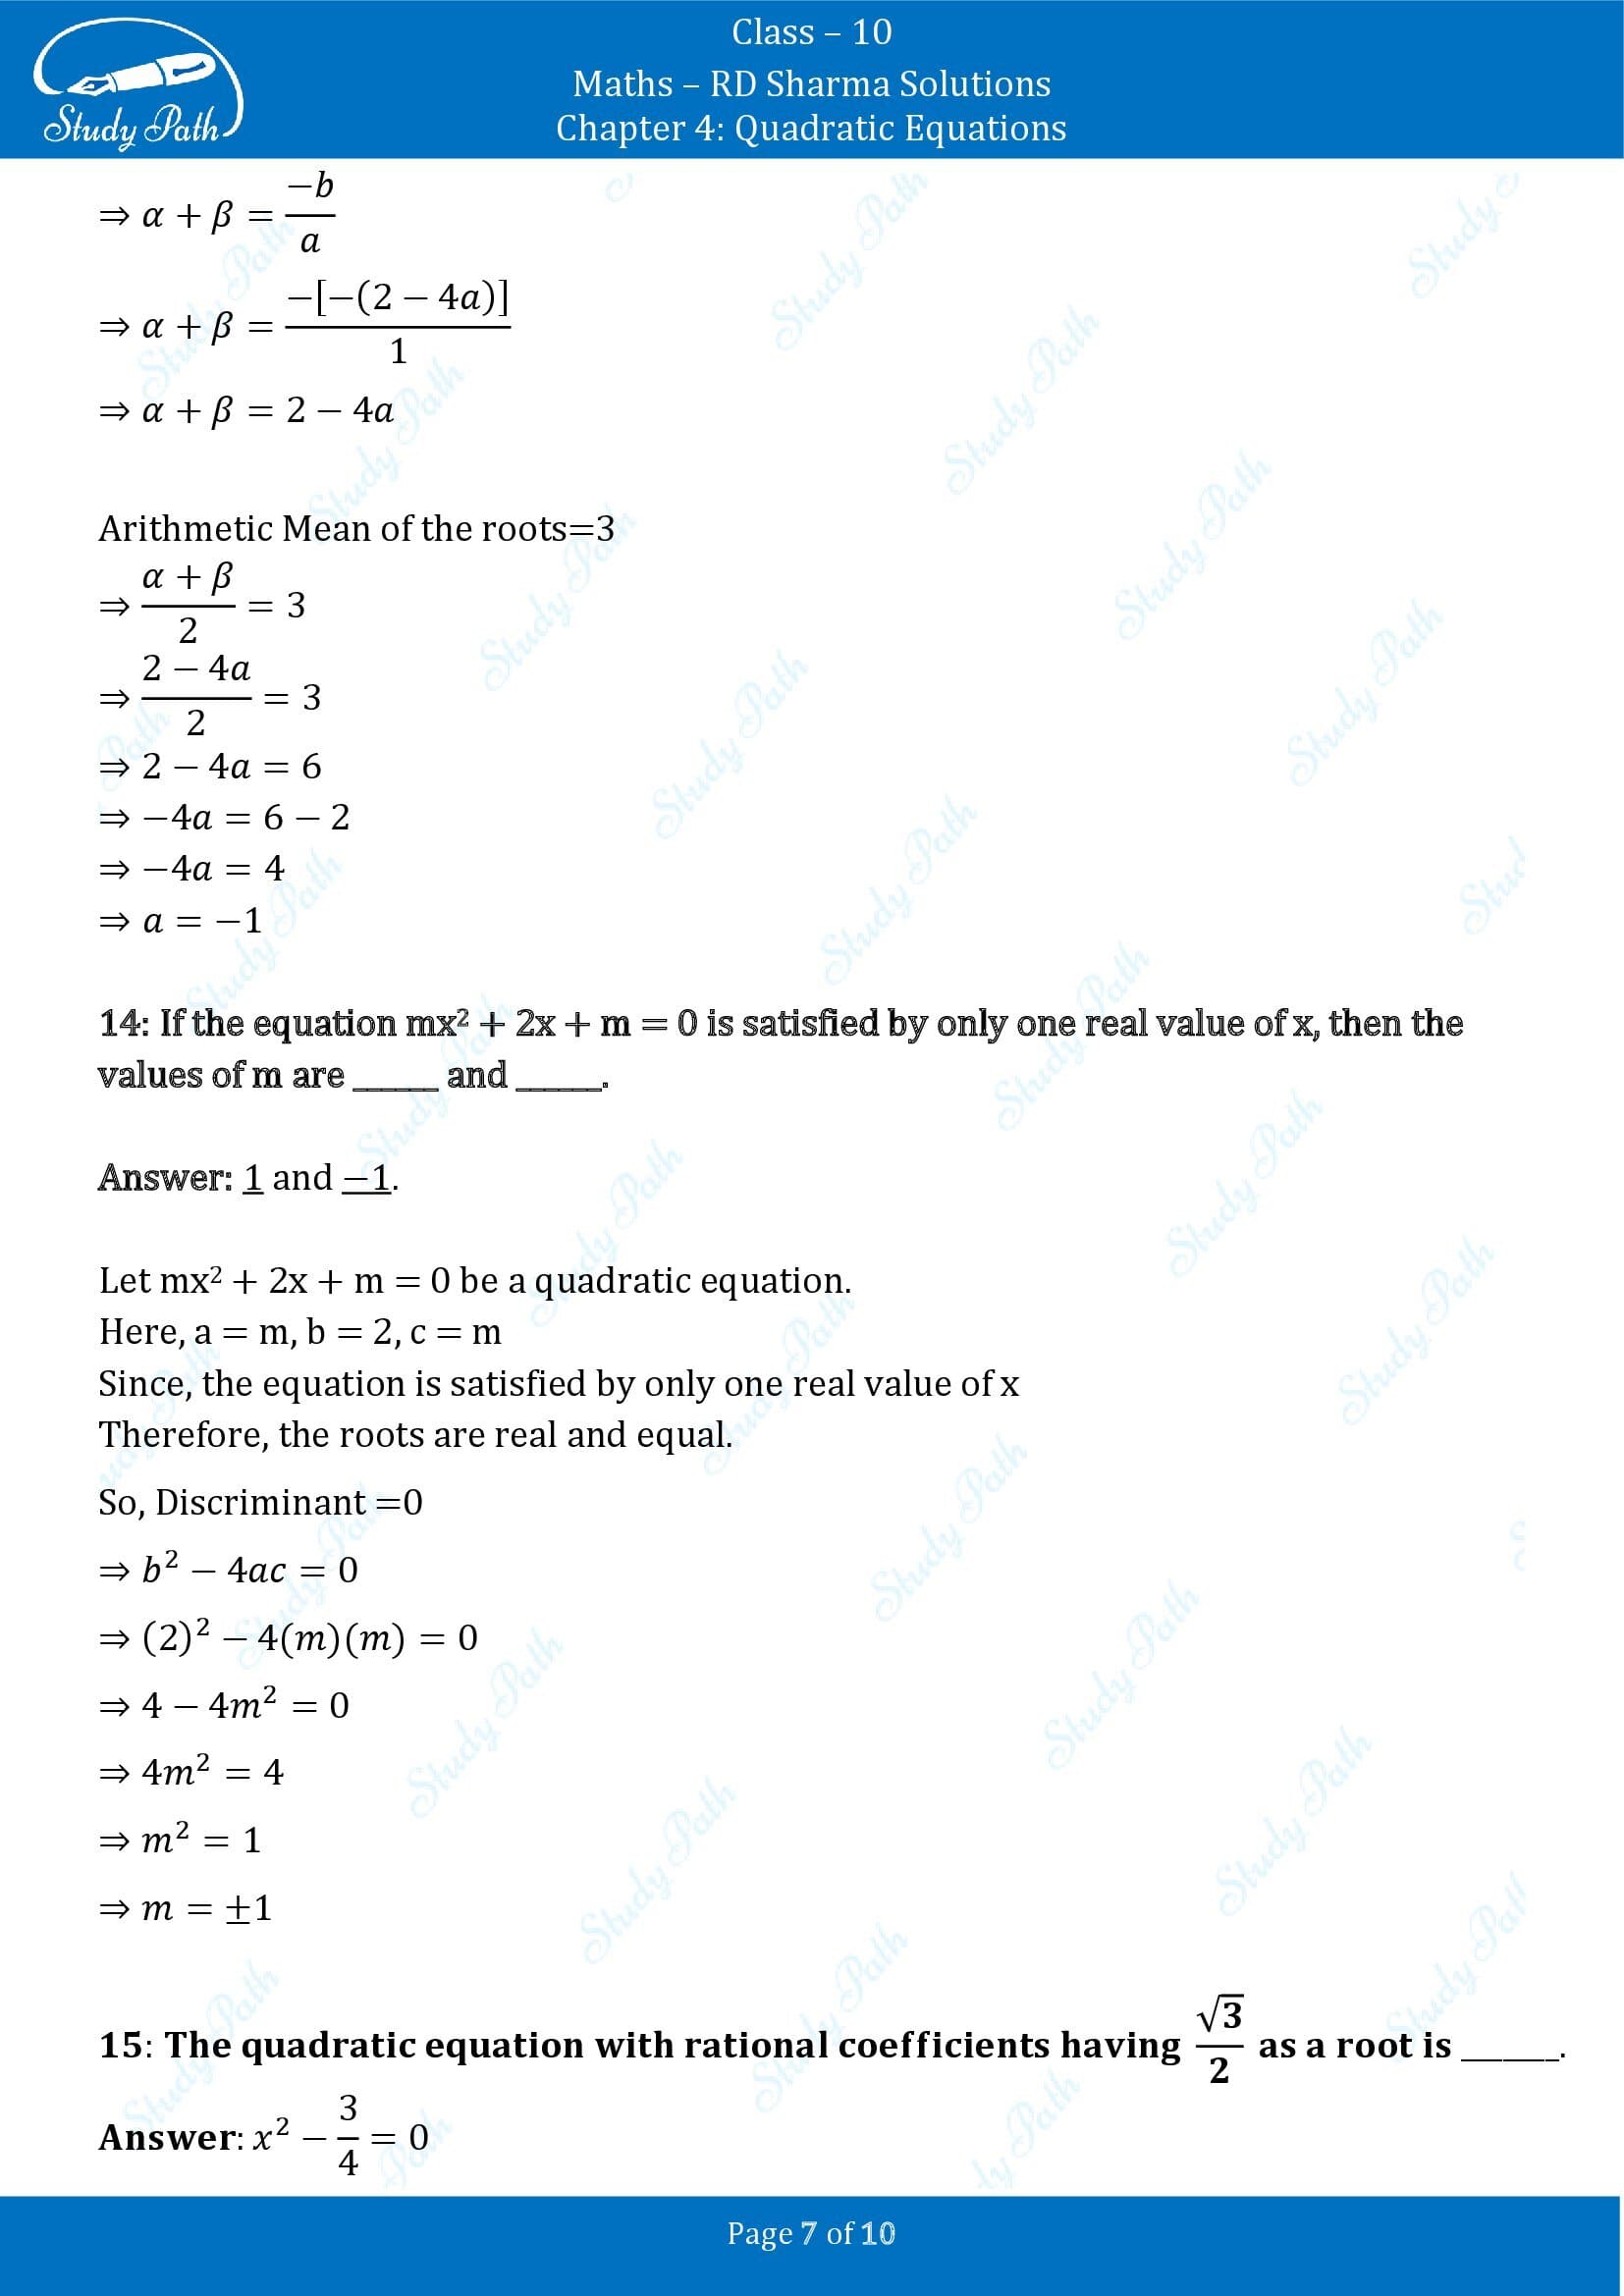 RD Sharma Solutions Class 10 Chapter 4 Quadratic Equations Fill in the Blank Type Questions FBQs 00007